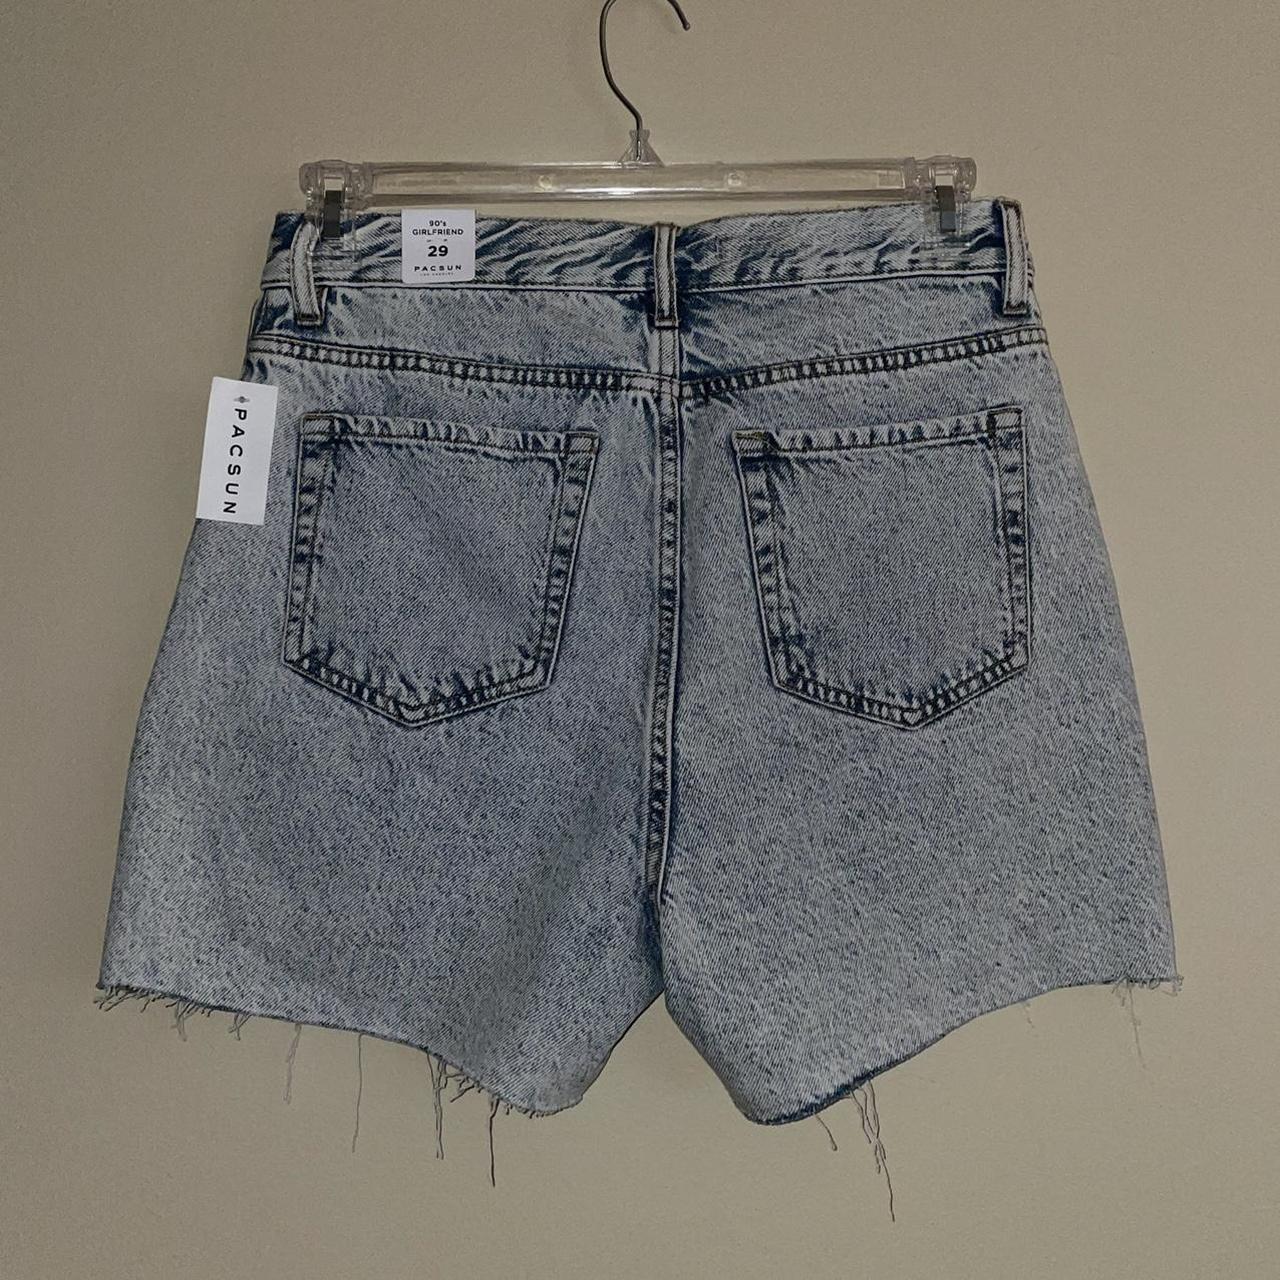 PacSun Women's Blue and White Shorts (2)